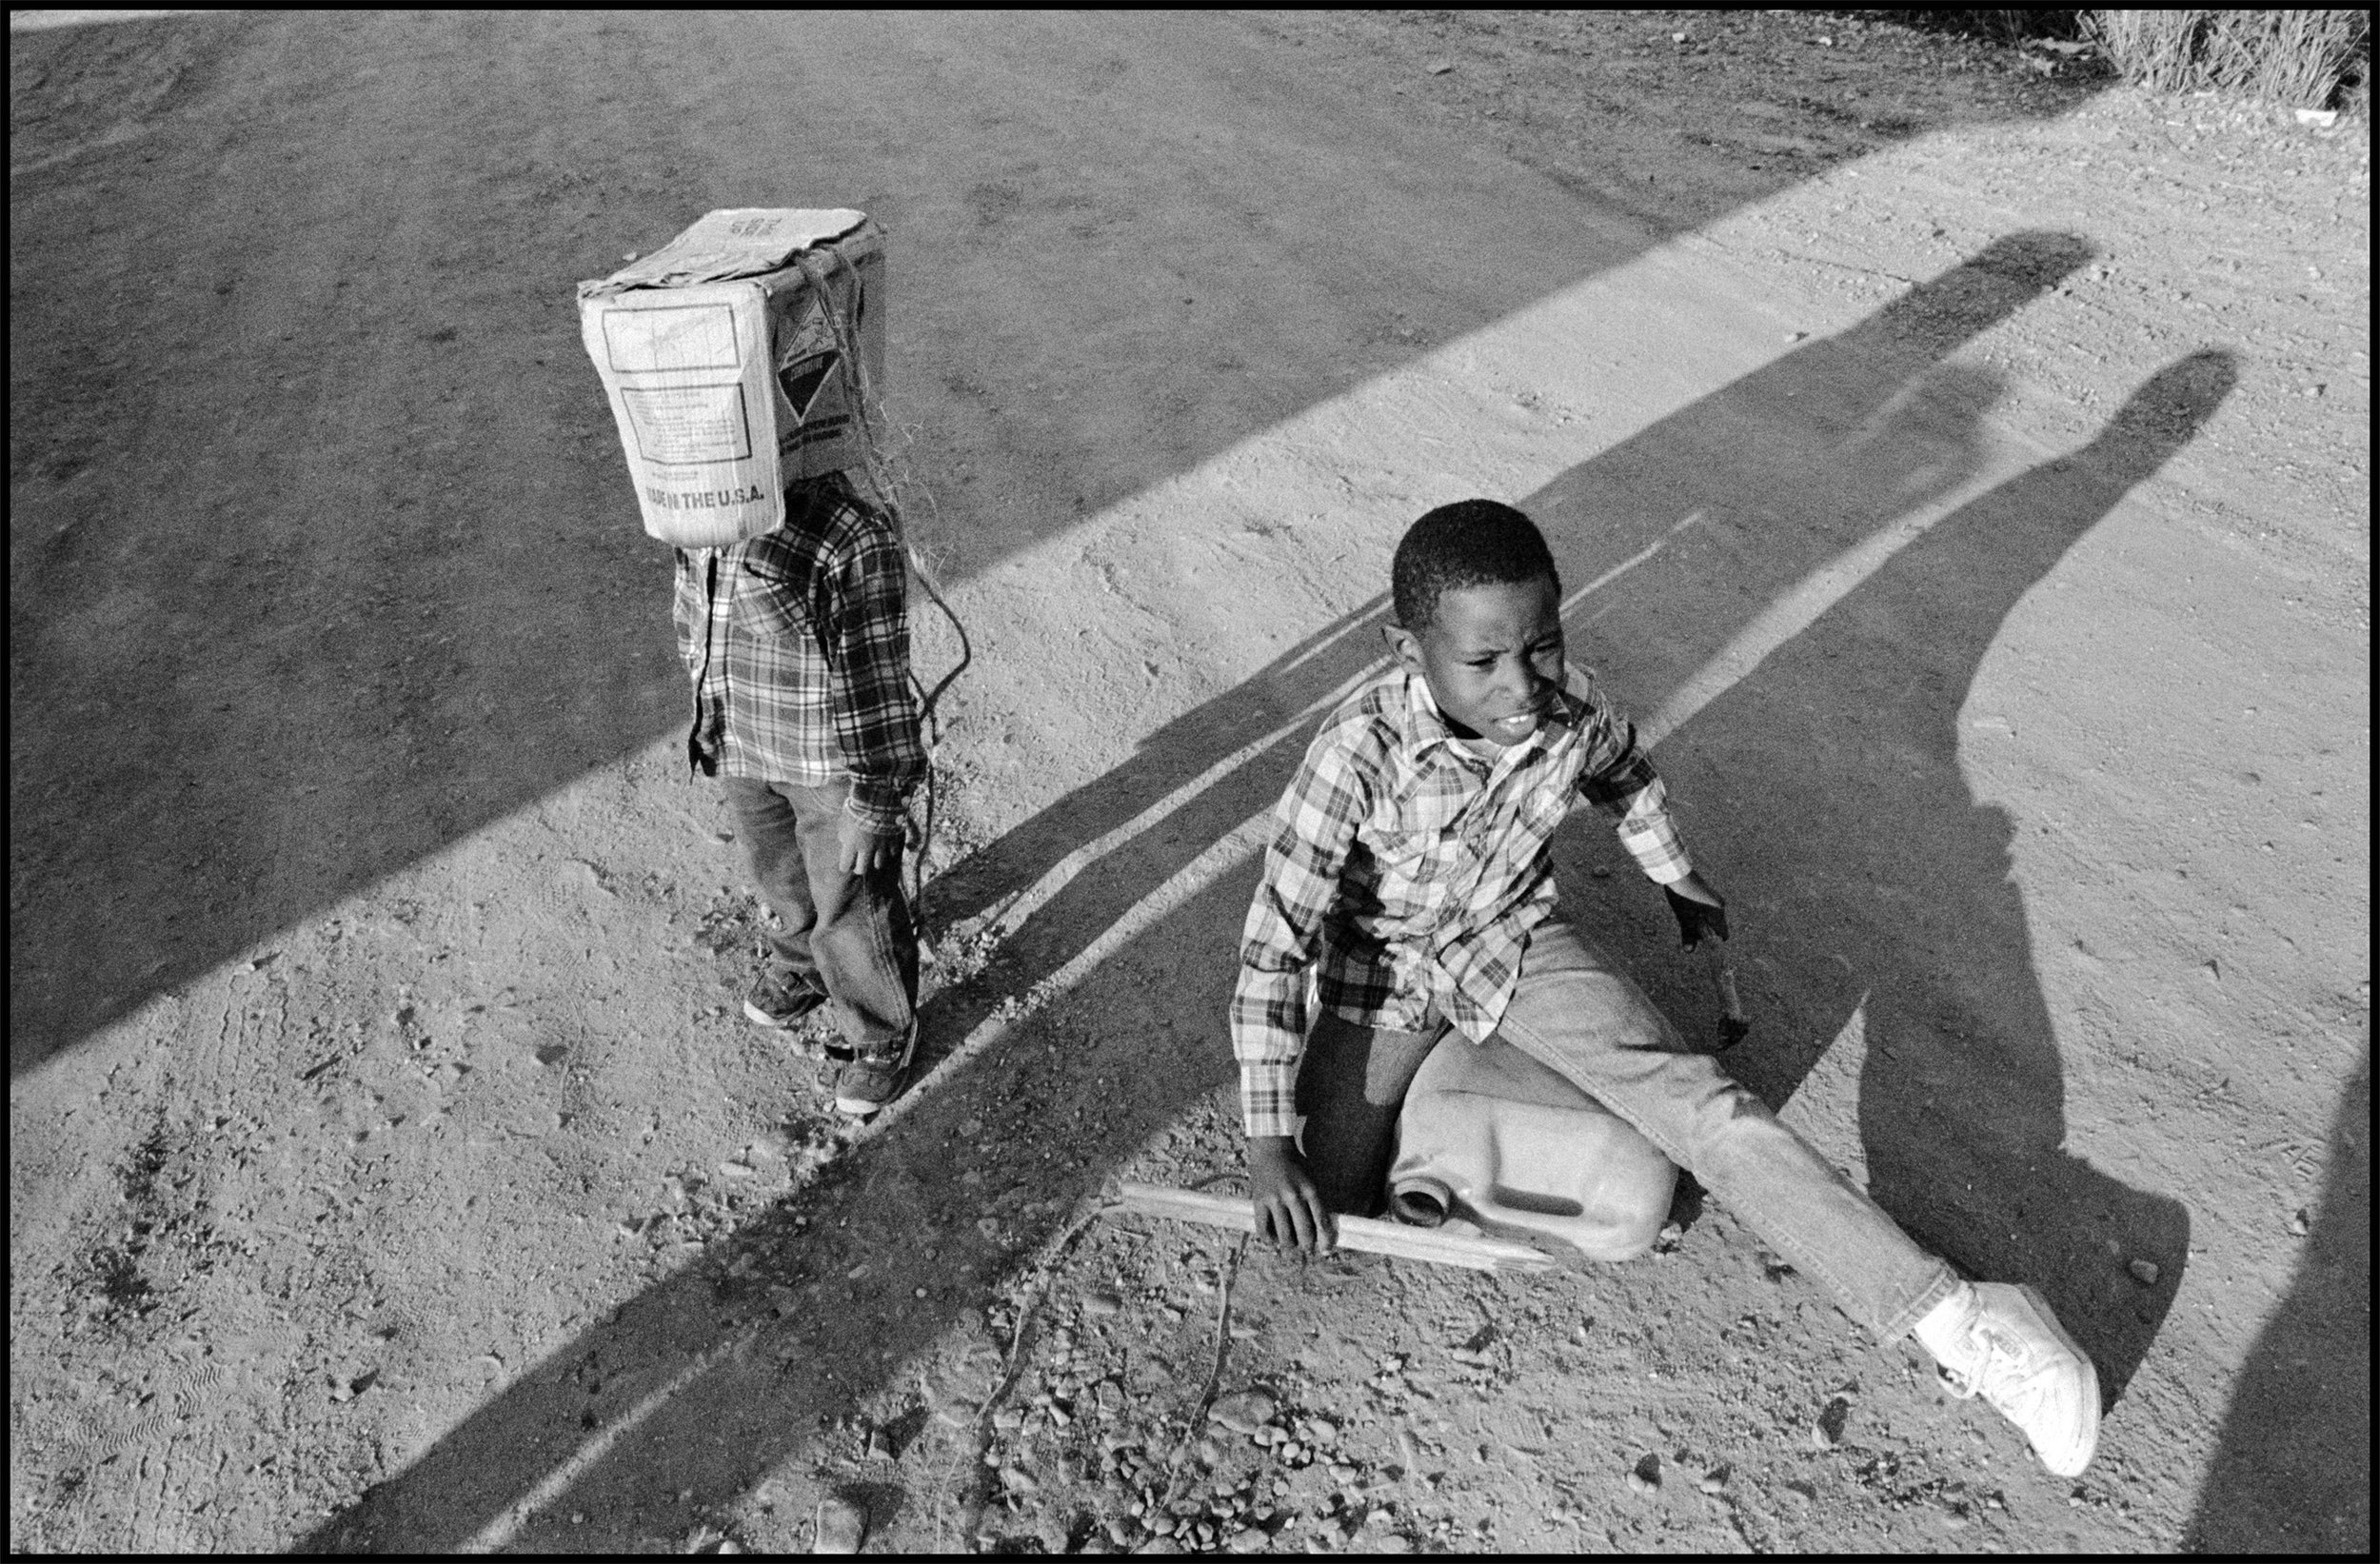   Children at Play, Tunica (Sugar Ditch), Mississippi  image: 1986/ printed: 2018 Archival Pigment Print 11 5/8 x 17 5/8 (image size) Do Good Fund Inc., 2018-004 